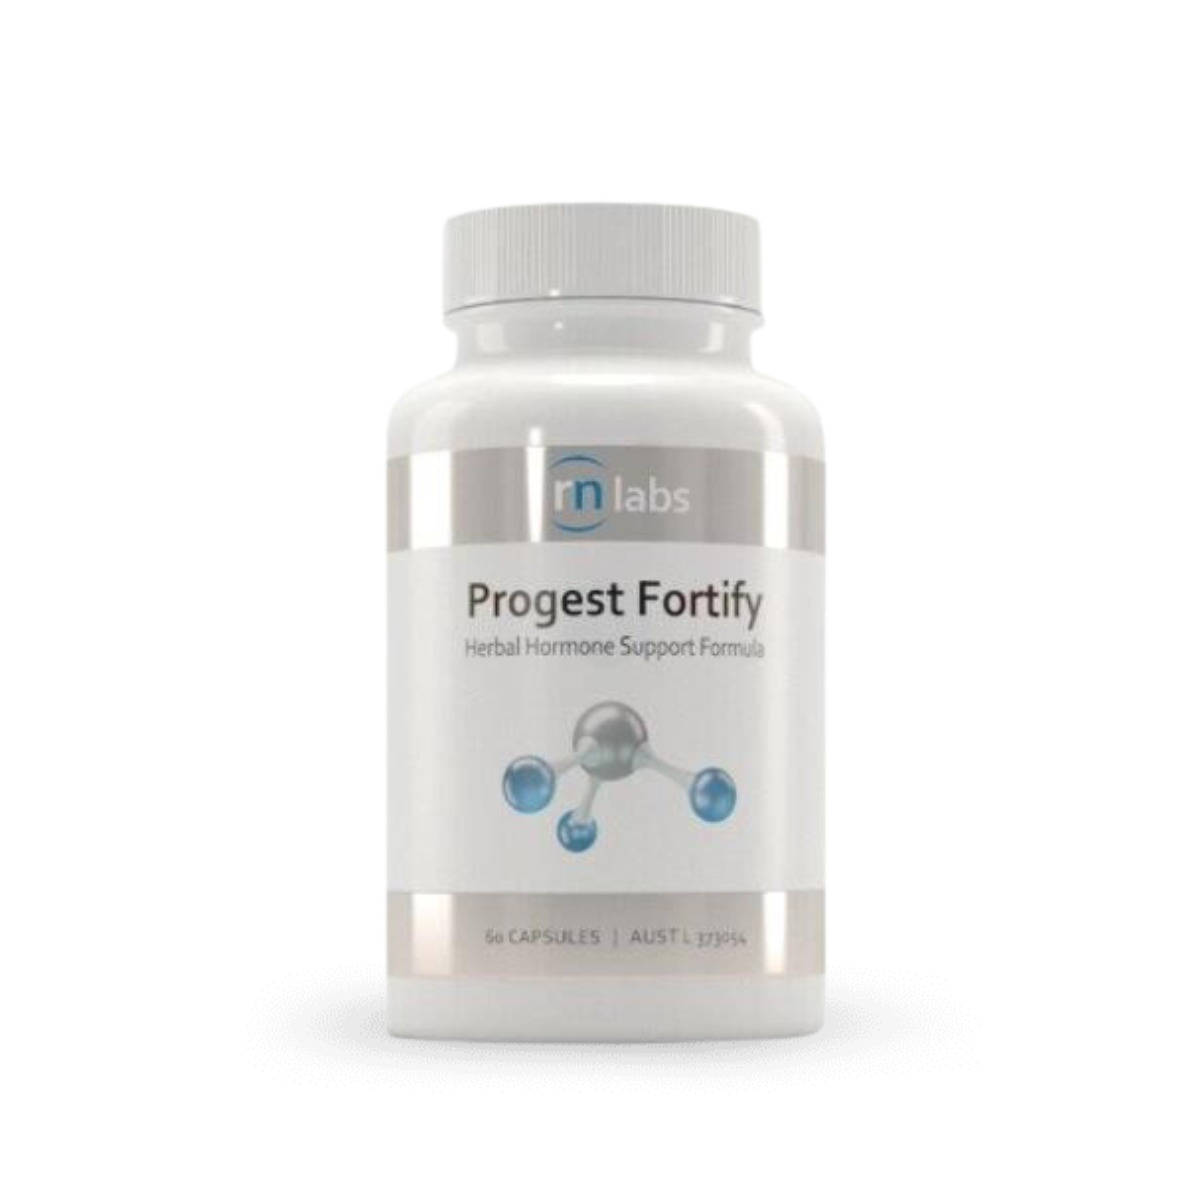 RN Labs Progest Fortify 60 Capsules